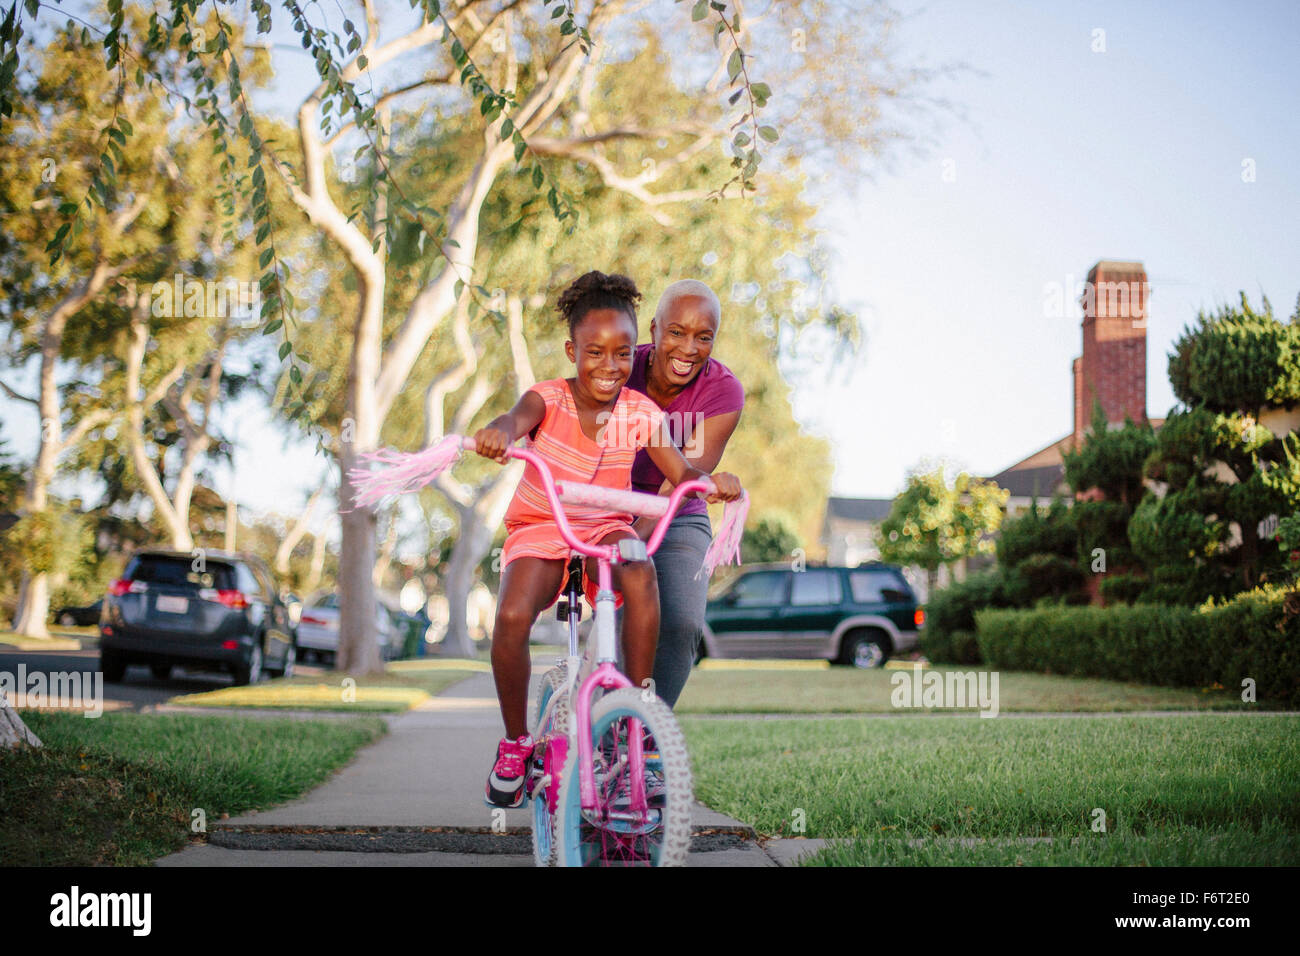 Mother pushing daughter on bicycle Stock Photo